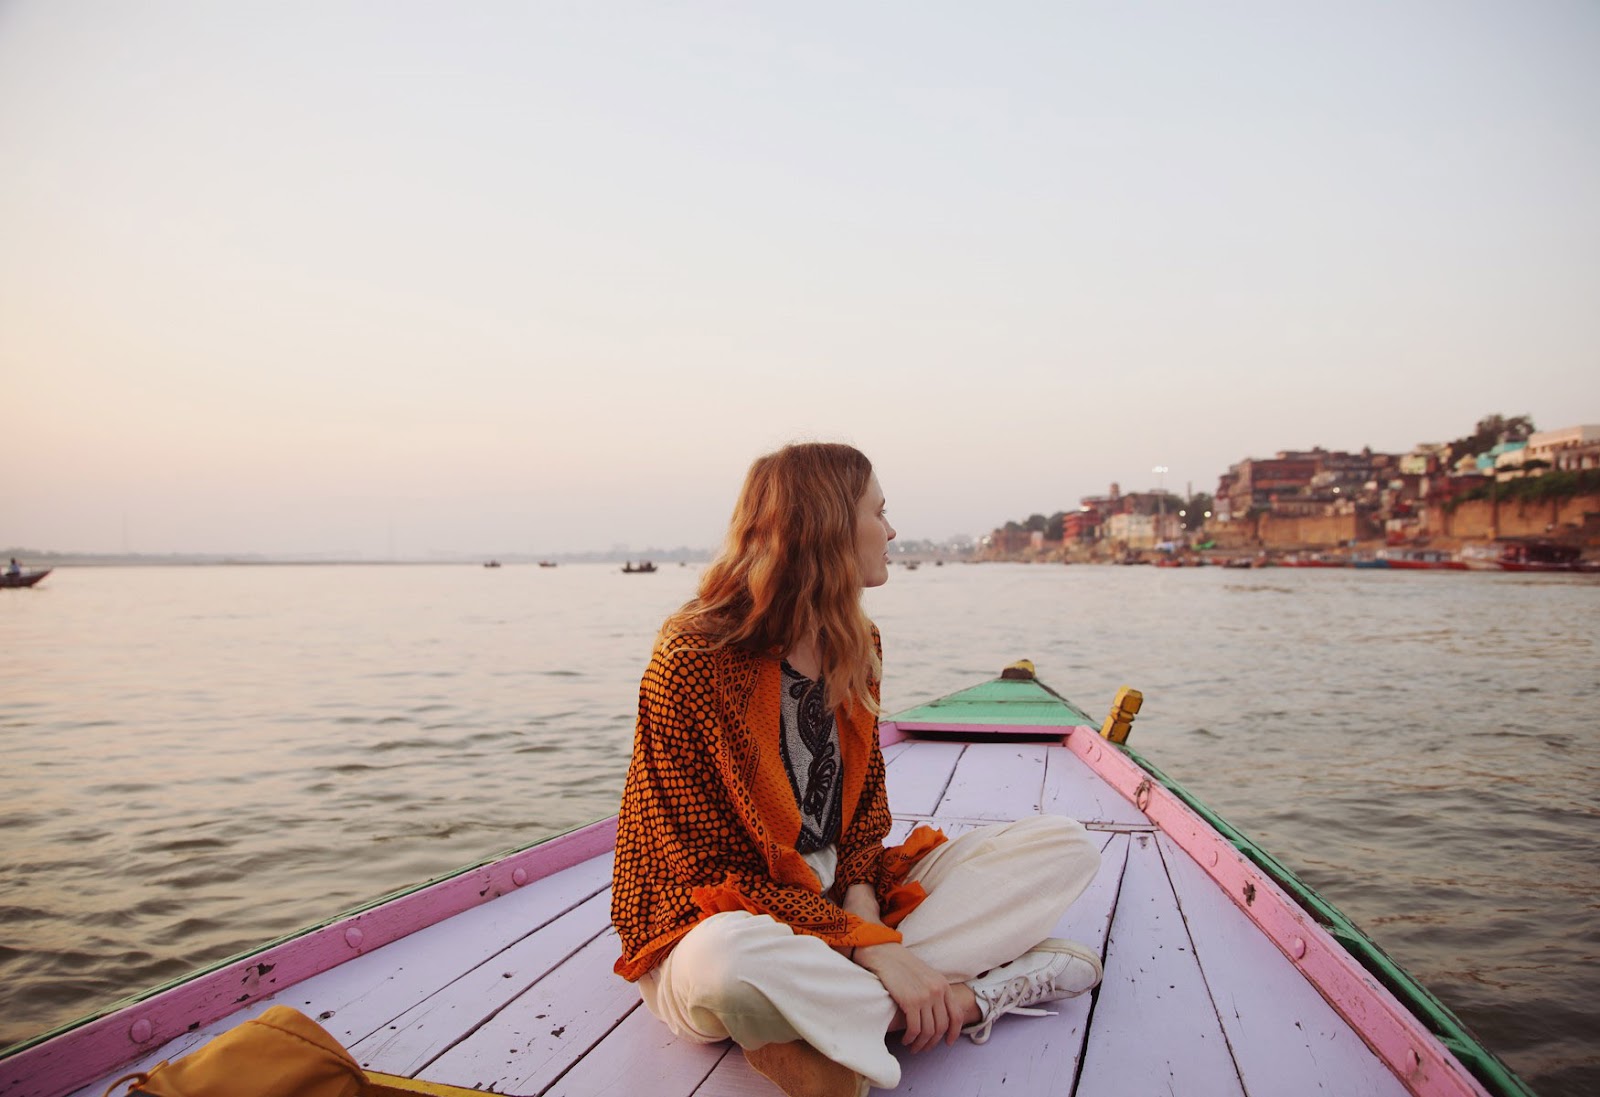 Women travel Guide to India